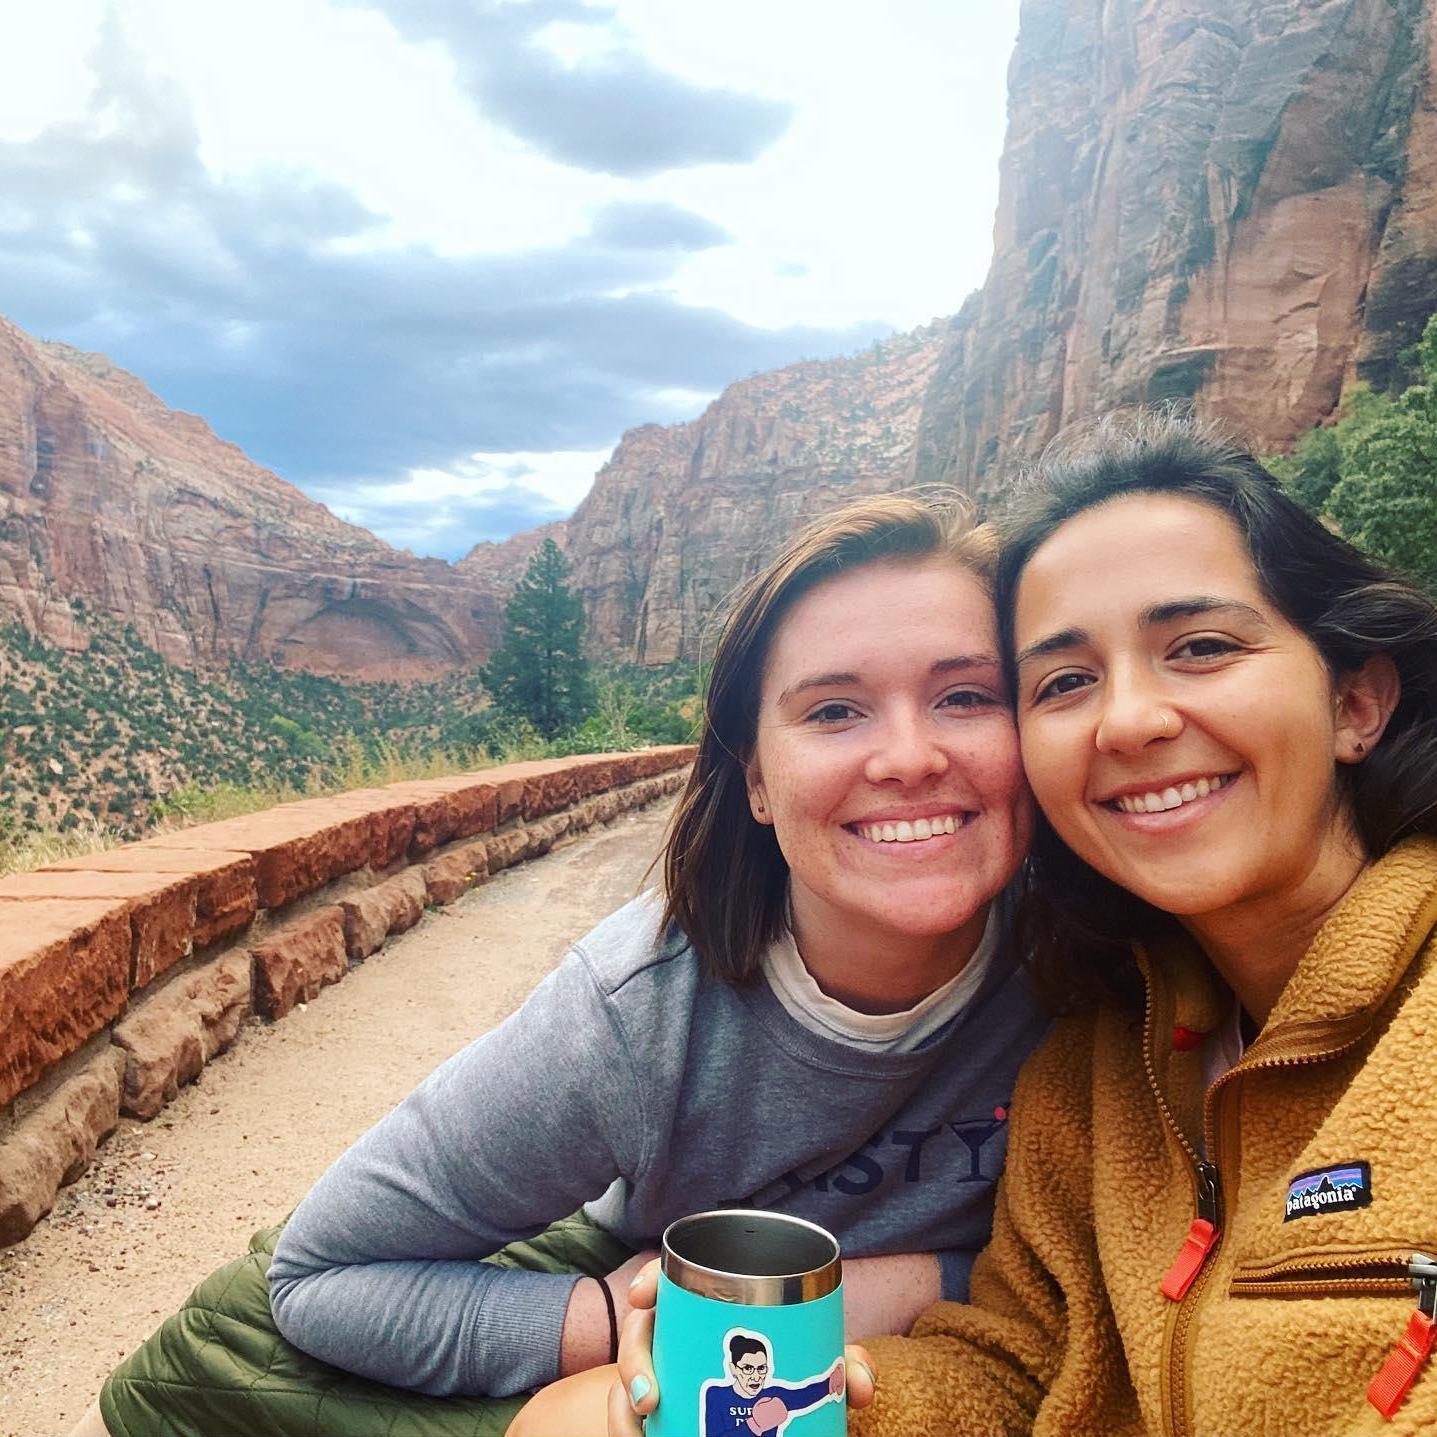 An anniversary trip to Zion National Park. September 2022